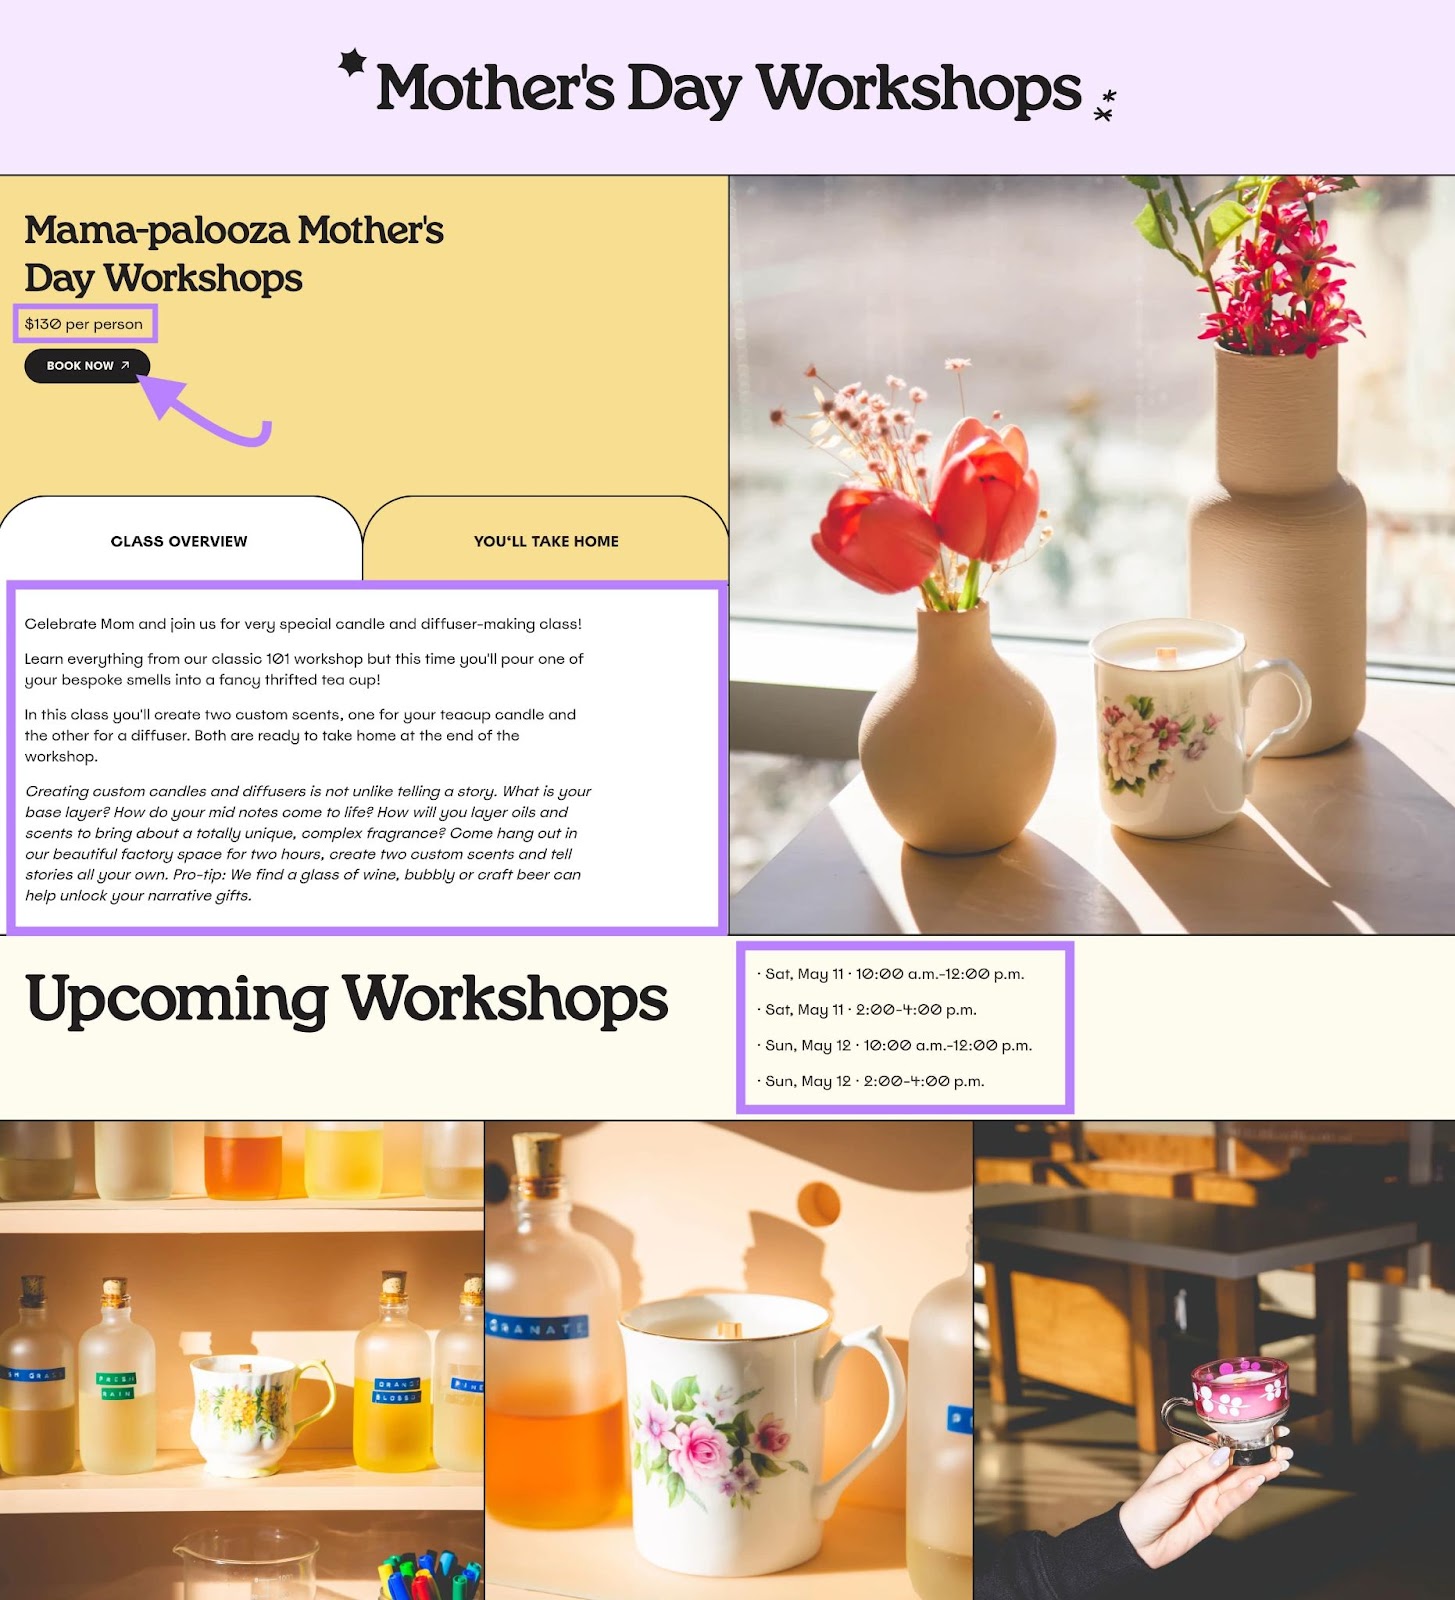 Mother's Day workshops details alongside vases of pink flowers, cups of hot drinks, and craft makes